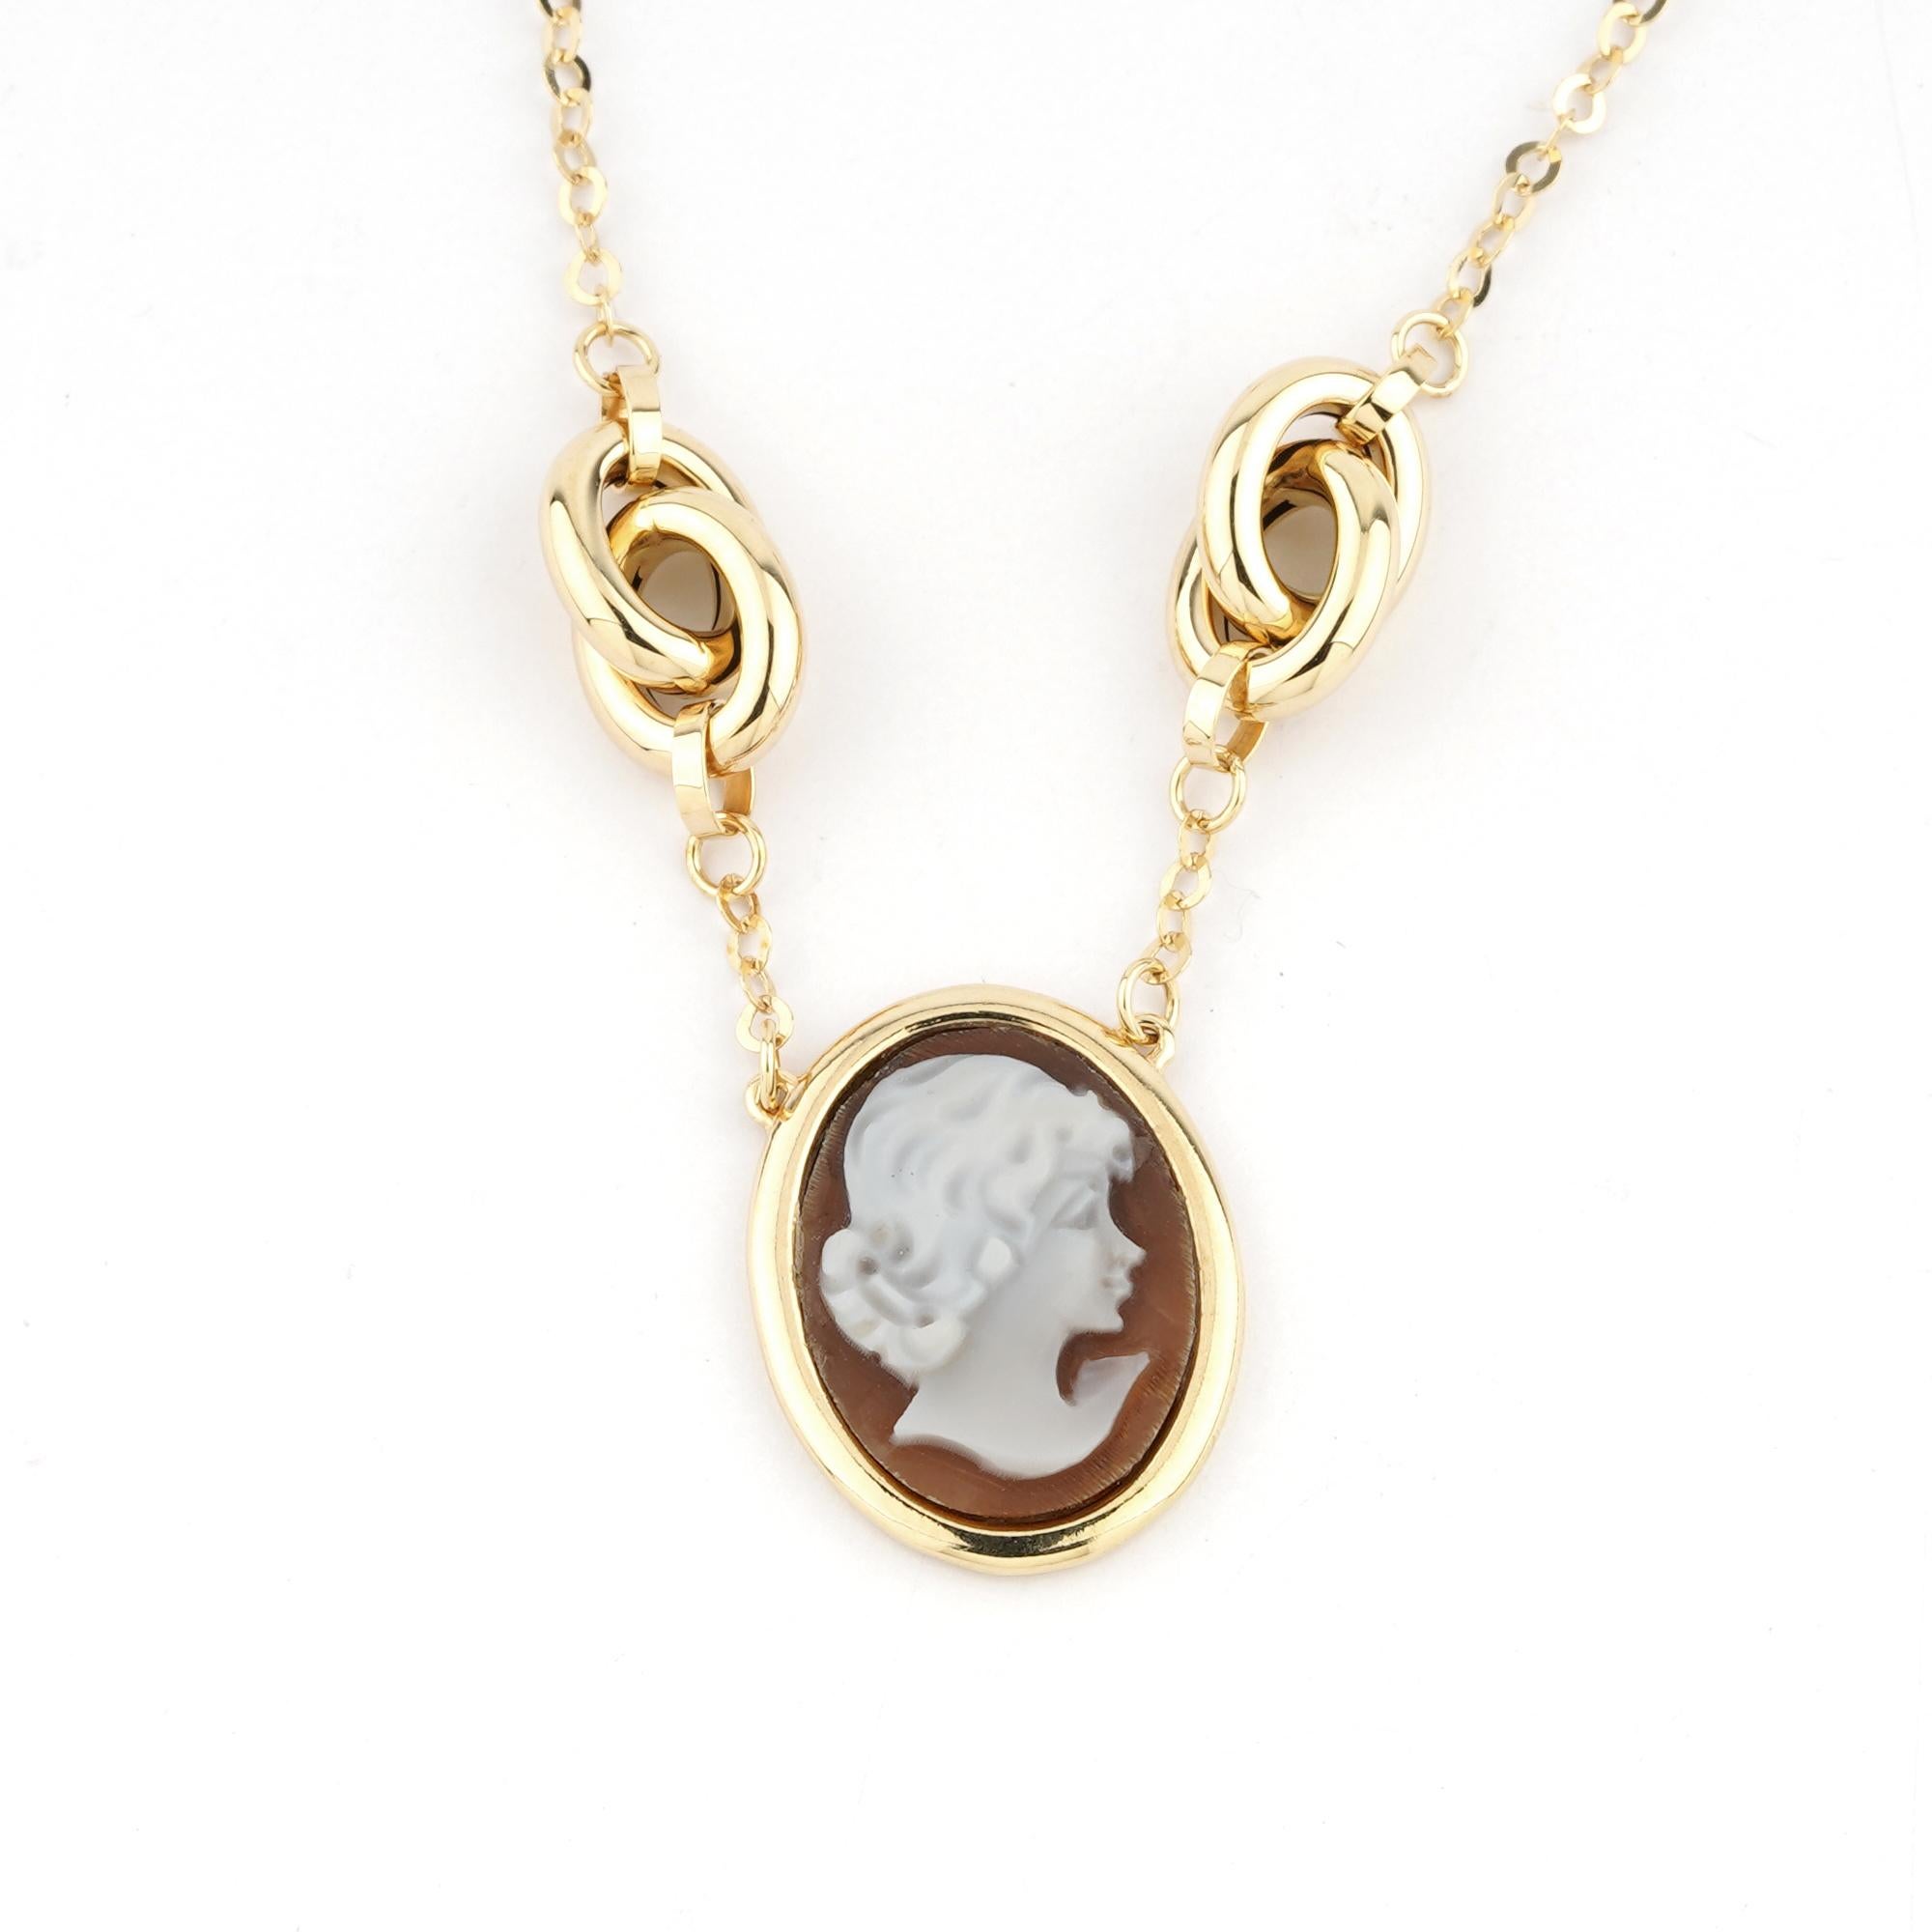 9 carat Gold beaded necklace with 16 mm Sea Shell Cameos. Fully handcarved Portrait on a sea shell cameo set in a 9ct Gold Beaded Necklace. Carvings are performed by our master artisans with generations of experience, all coming from Torre del